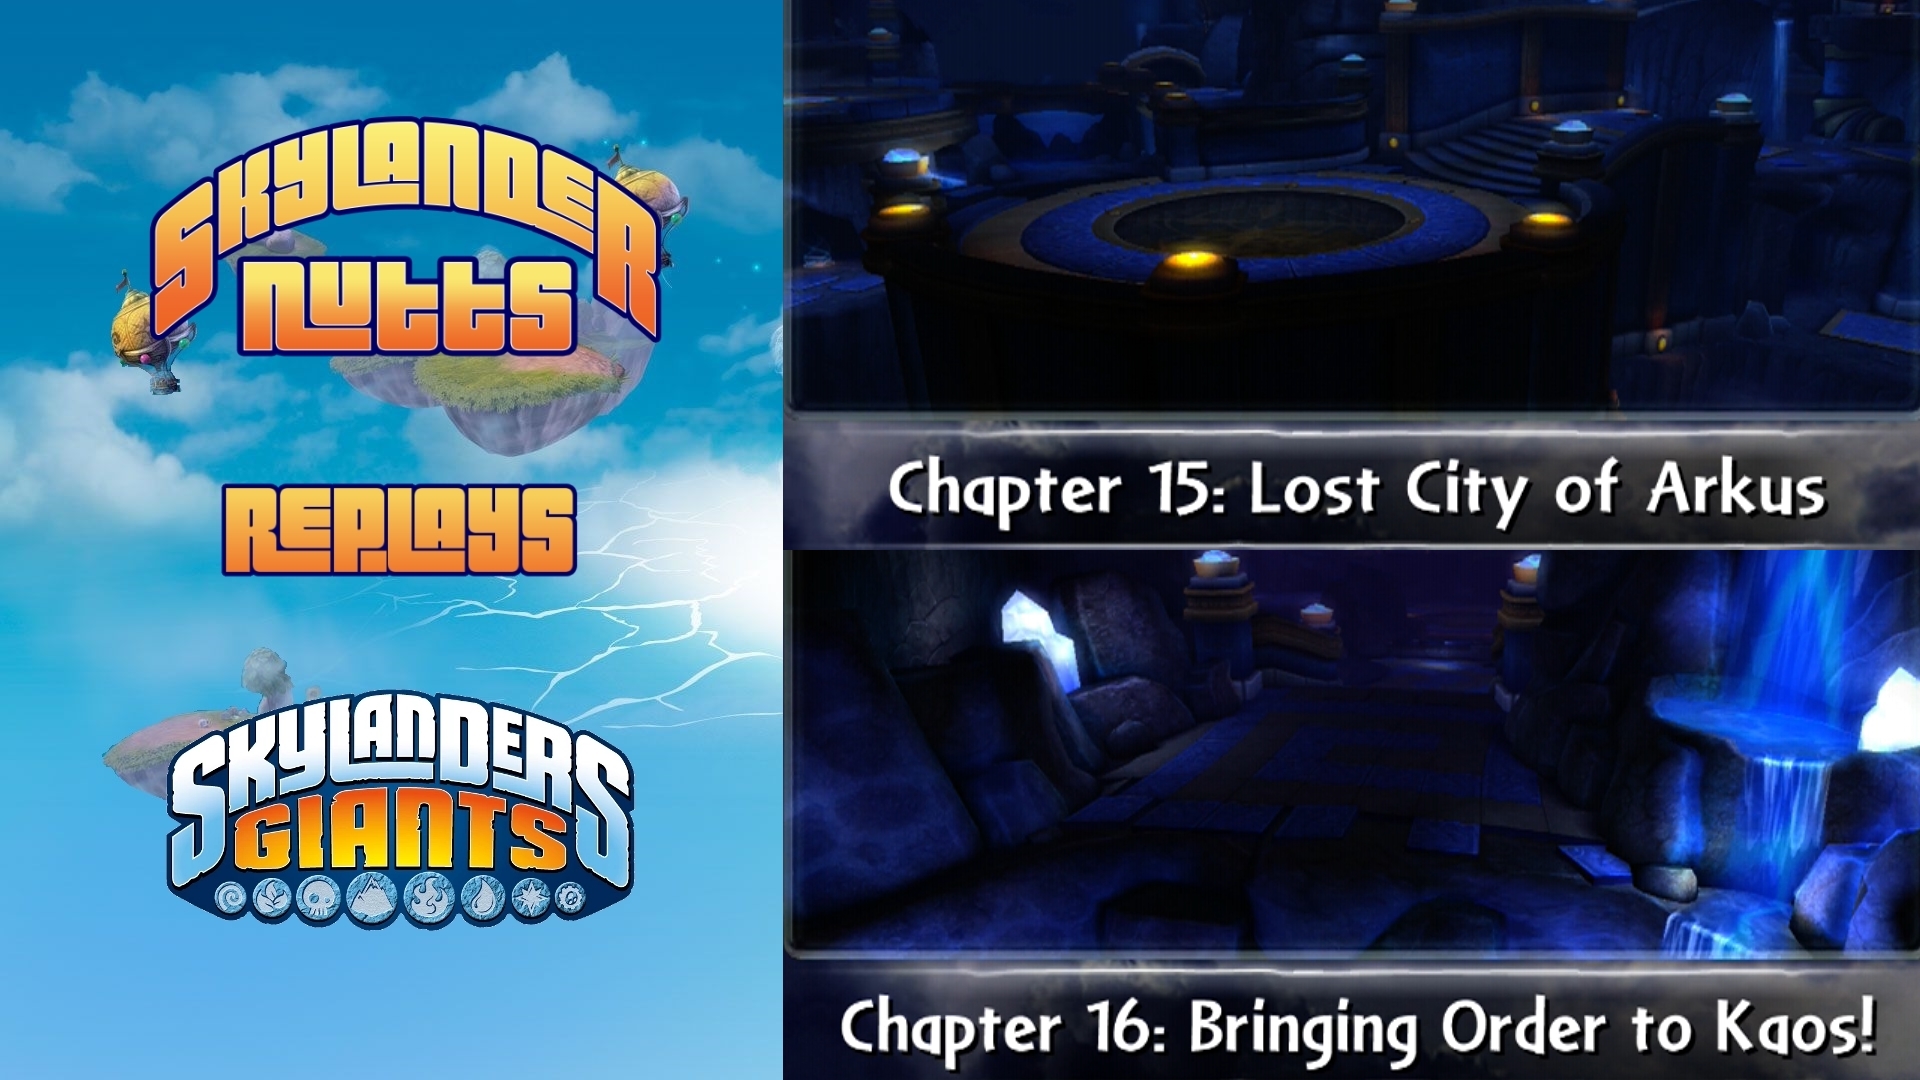 SkylanderNutts Replays Giants (Ch 15 - Lost City of Arkus and Ch 16 - Bringing Order to Kaos)